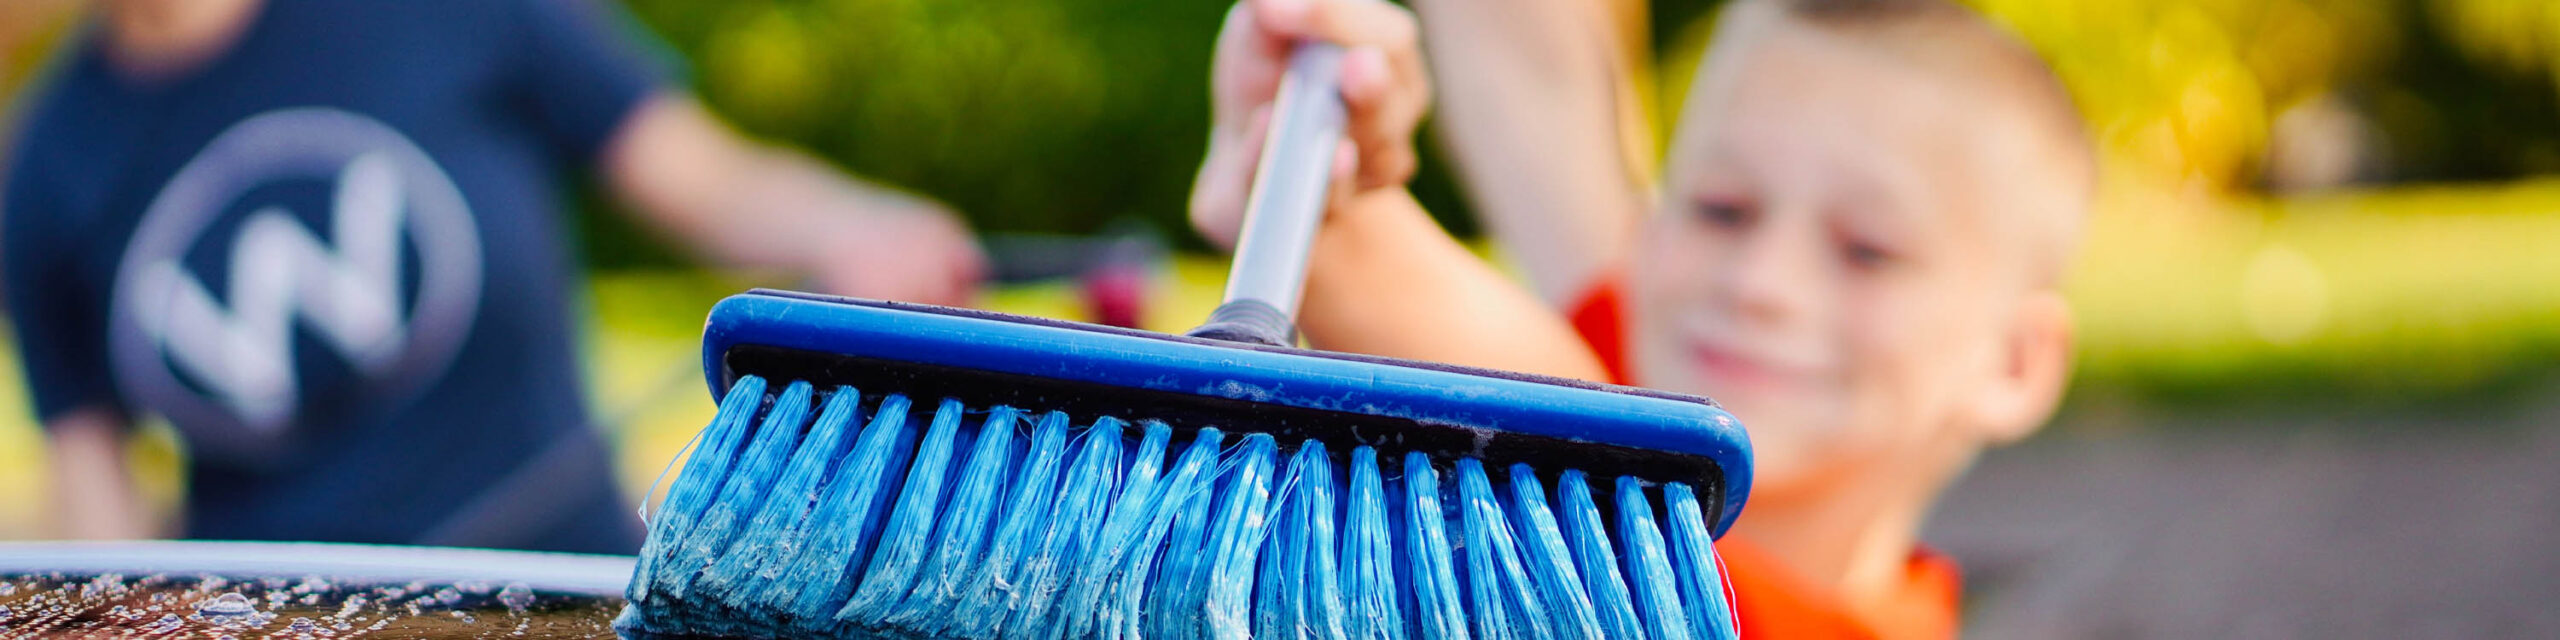 6 Cleaning Hacks That Janitors Want You to Know